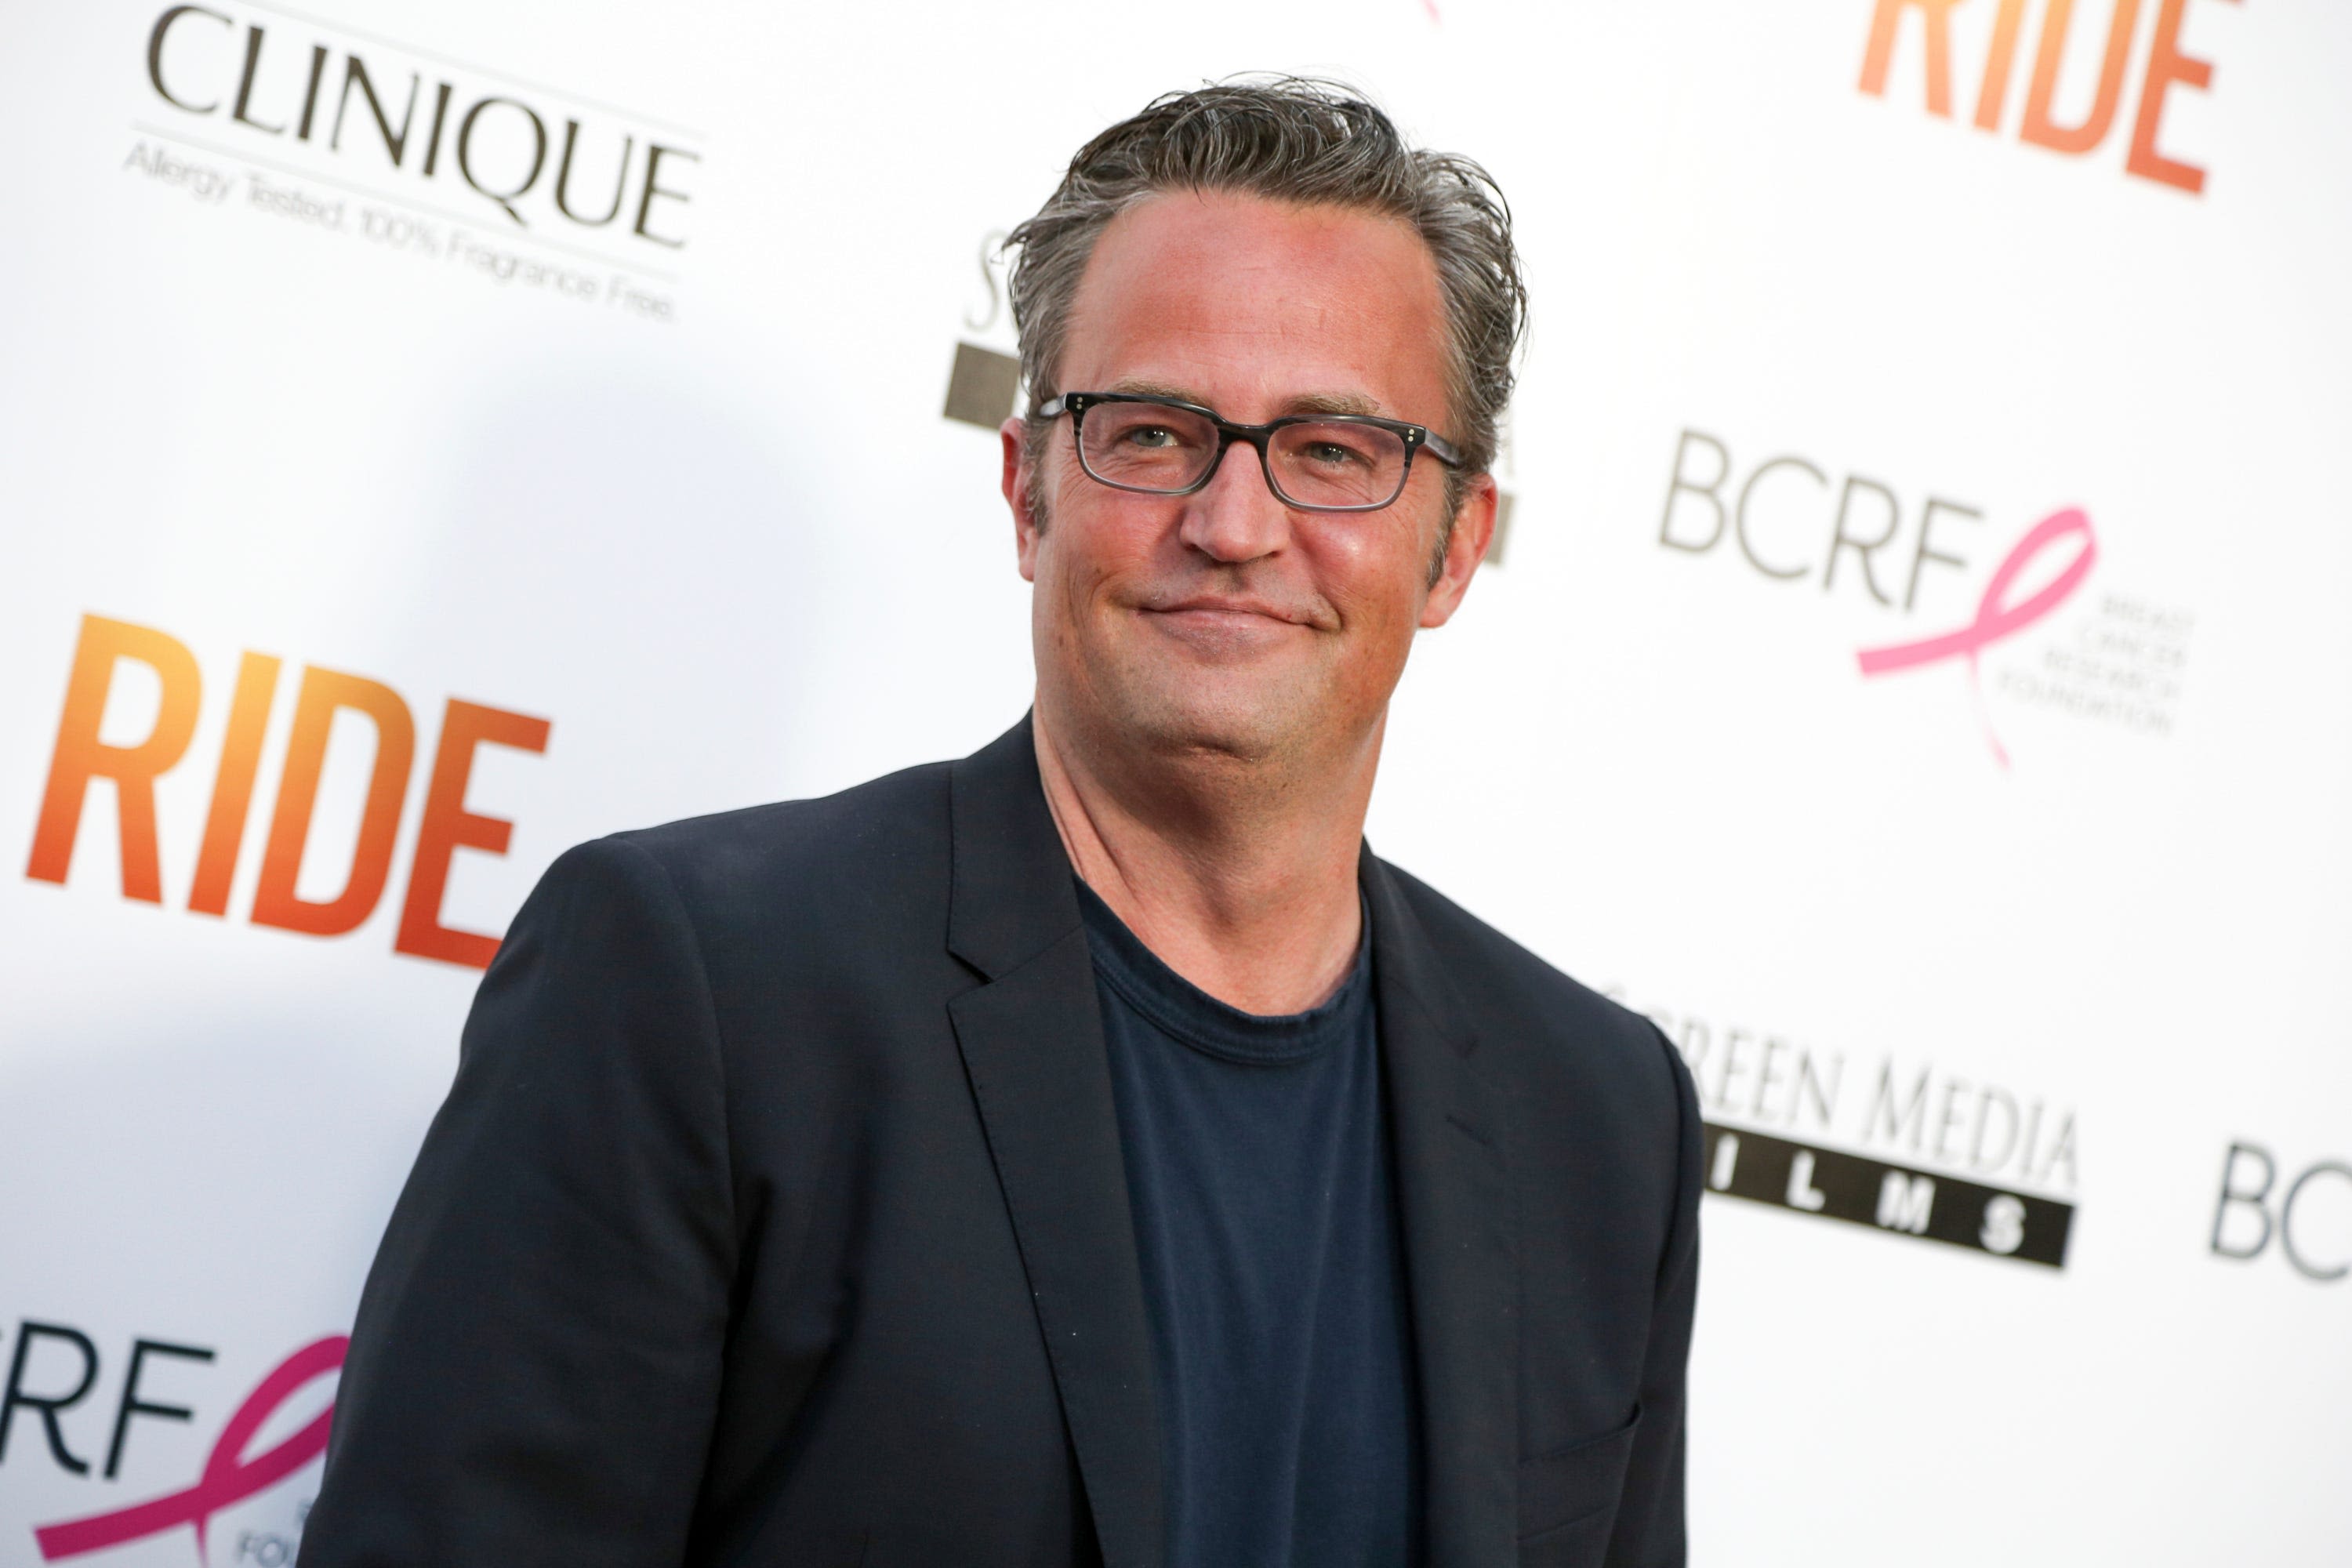 Death of Matthew Perry from 'effects of ketamine' under investigation by multiple agencies